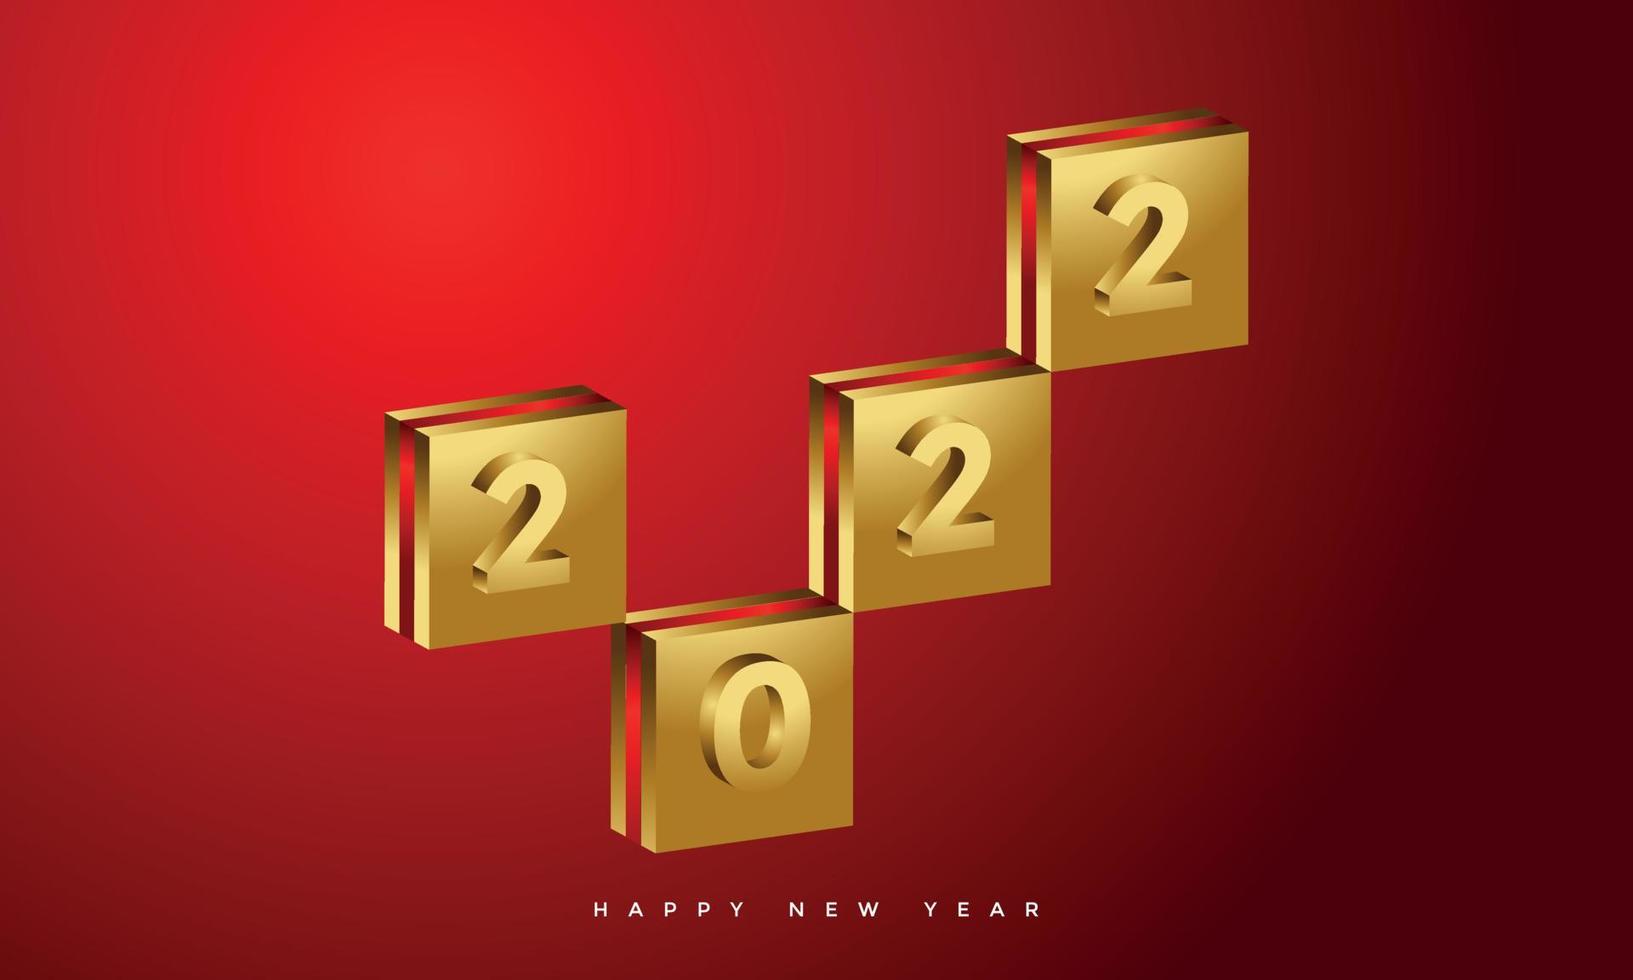 Happy new year 2022 background premium and luxurious design vector